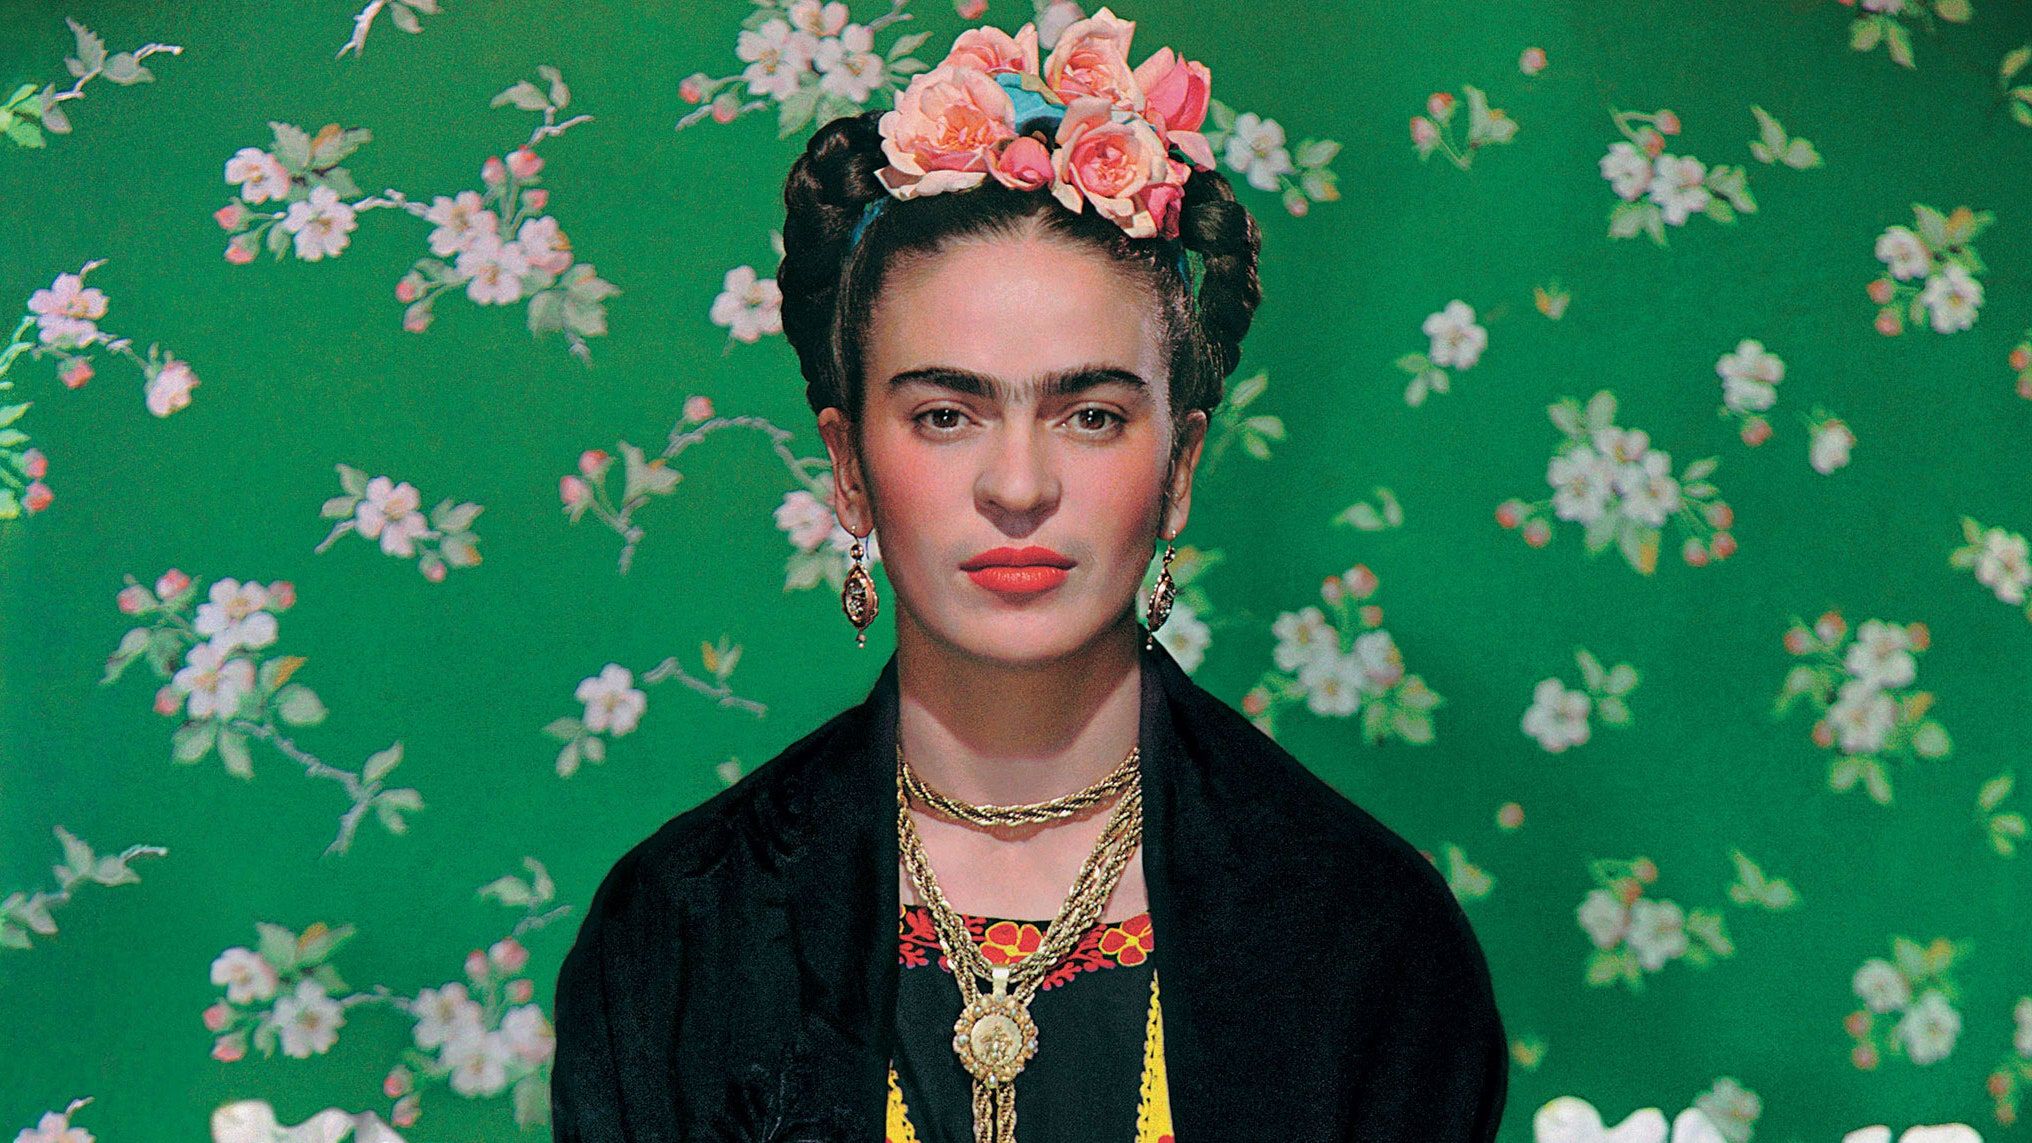 Frida Kahlo in front of a green background with flowers. - Frida Kahlo